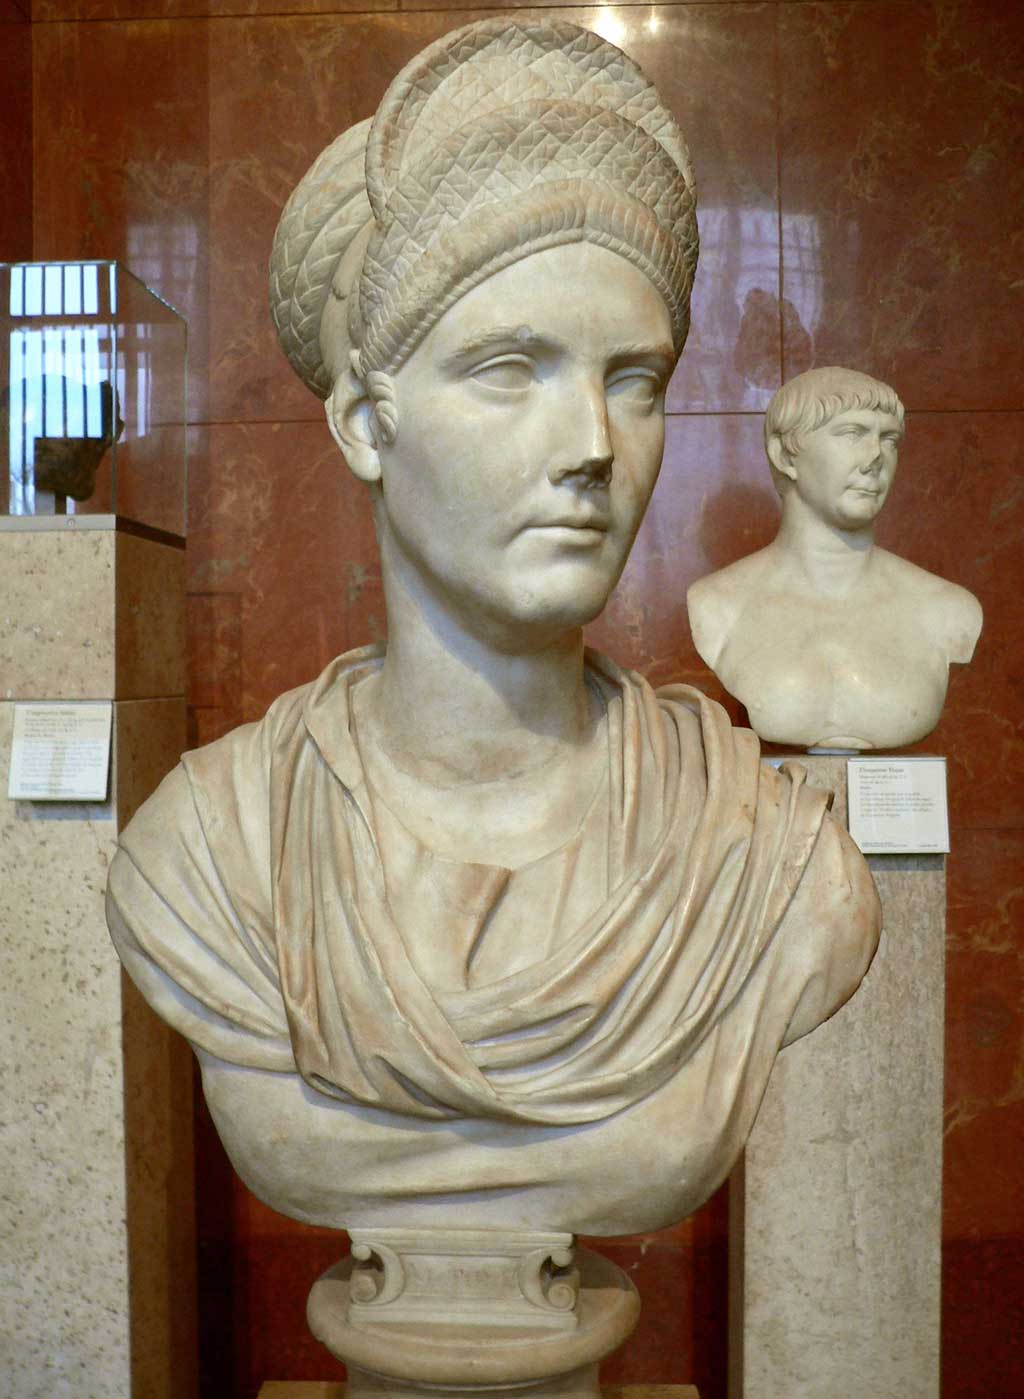 A bust of Trajan's Neice, Matidia. Like the Flavians, Matidia's hair stands in a stack, but unlike the Flavians, her hair stands in flat layers than in curls.